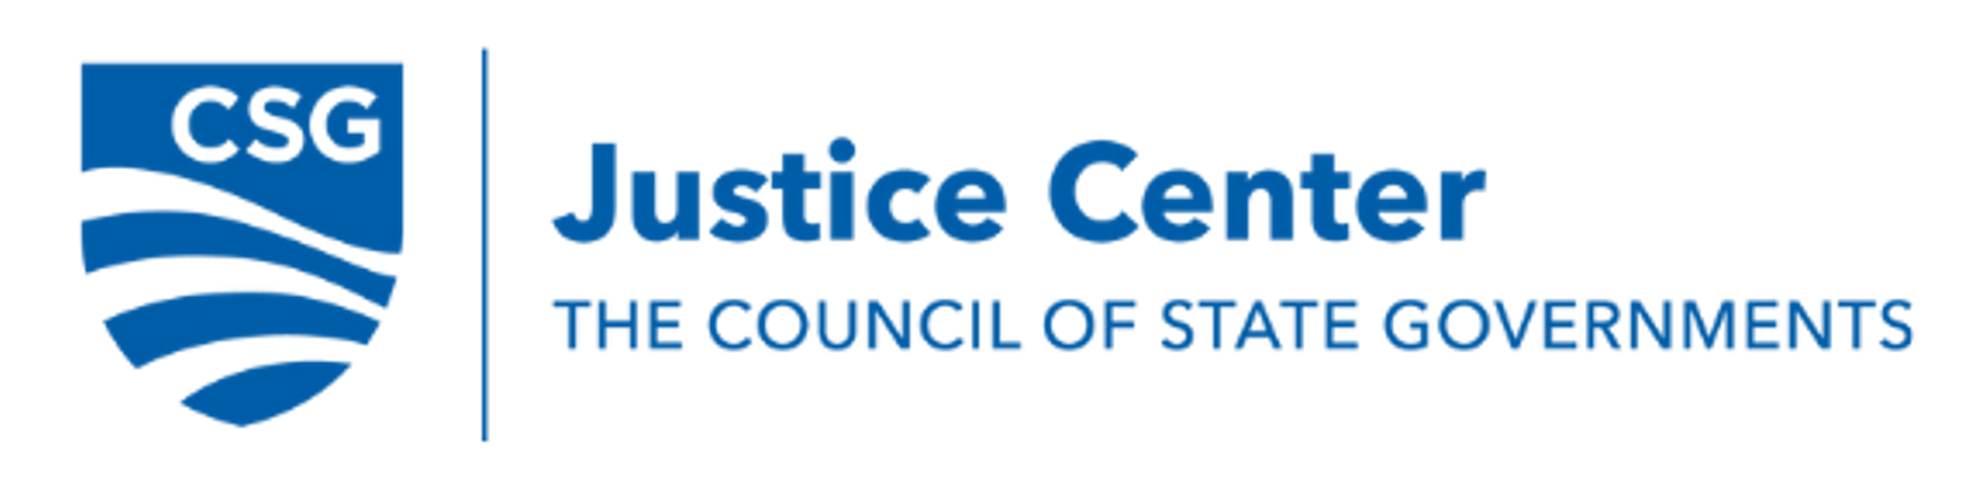 The Council of State Governments Justice Center logo